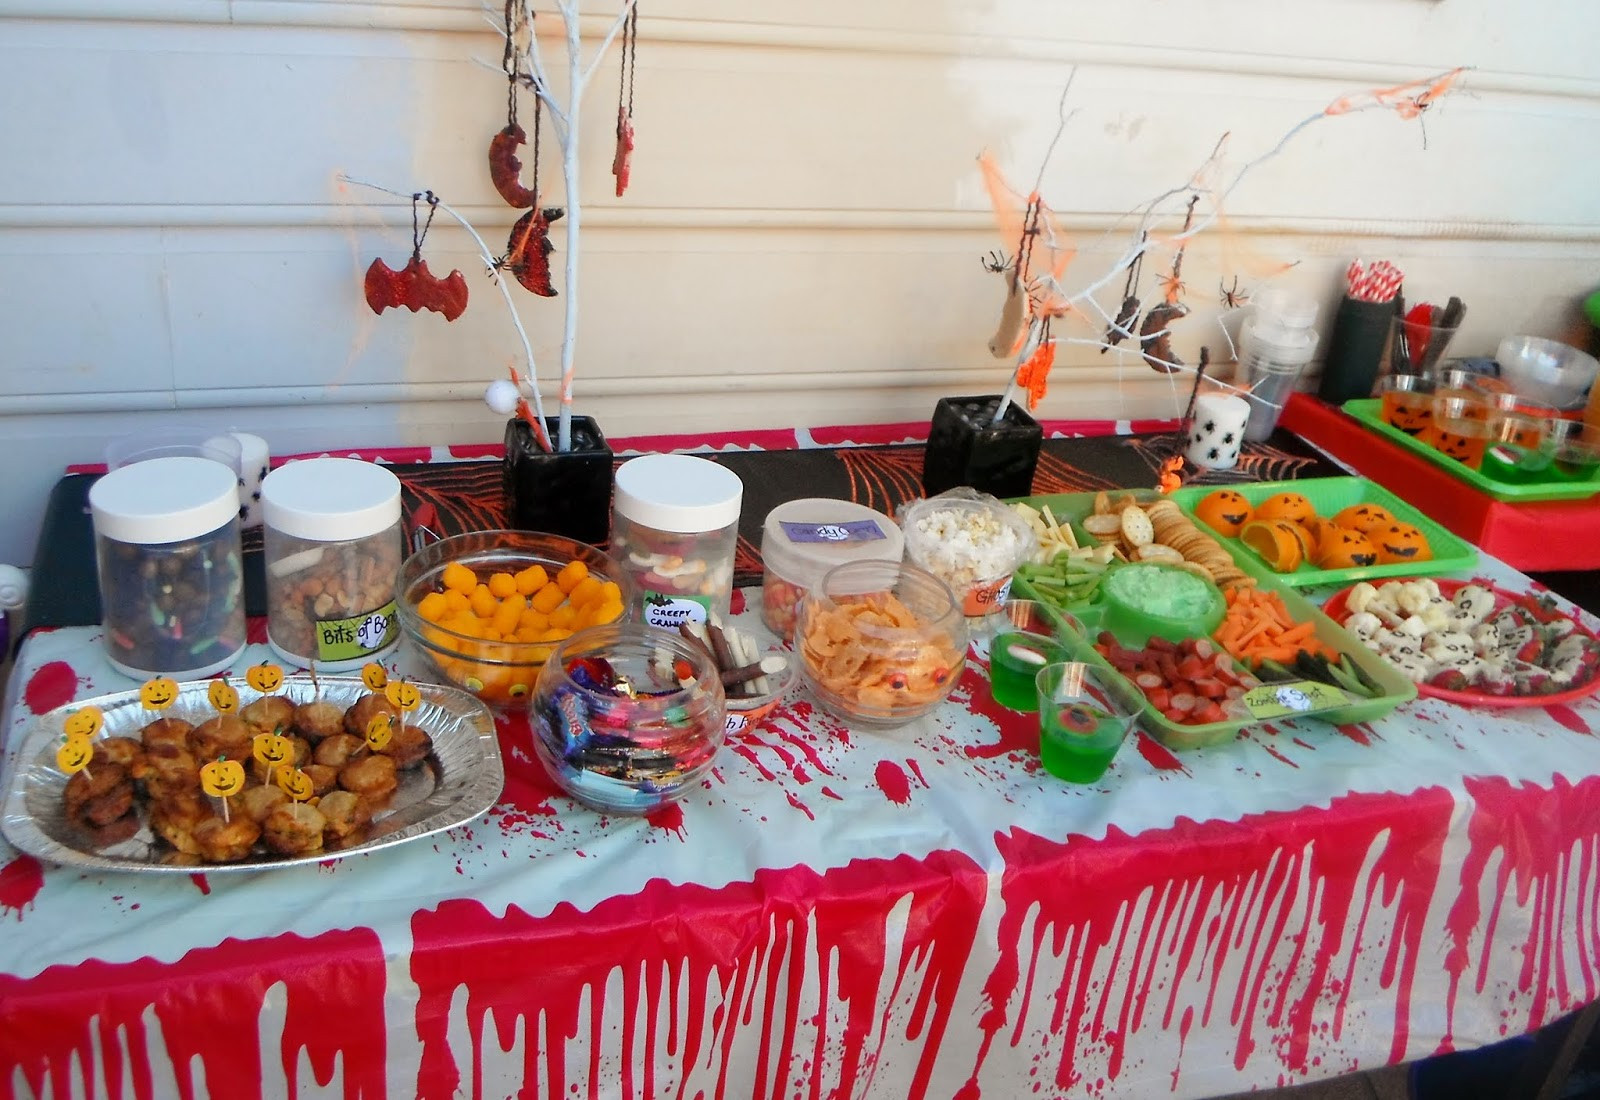 Halloween Food For Parties
 Adventures at home with Mum Halloween Party Food